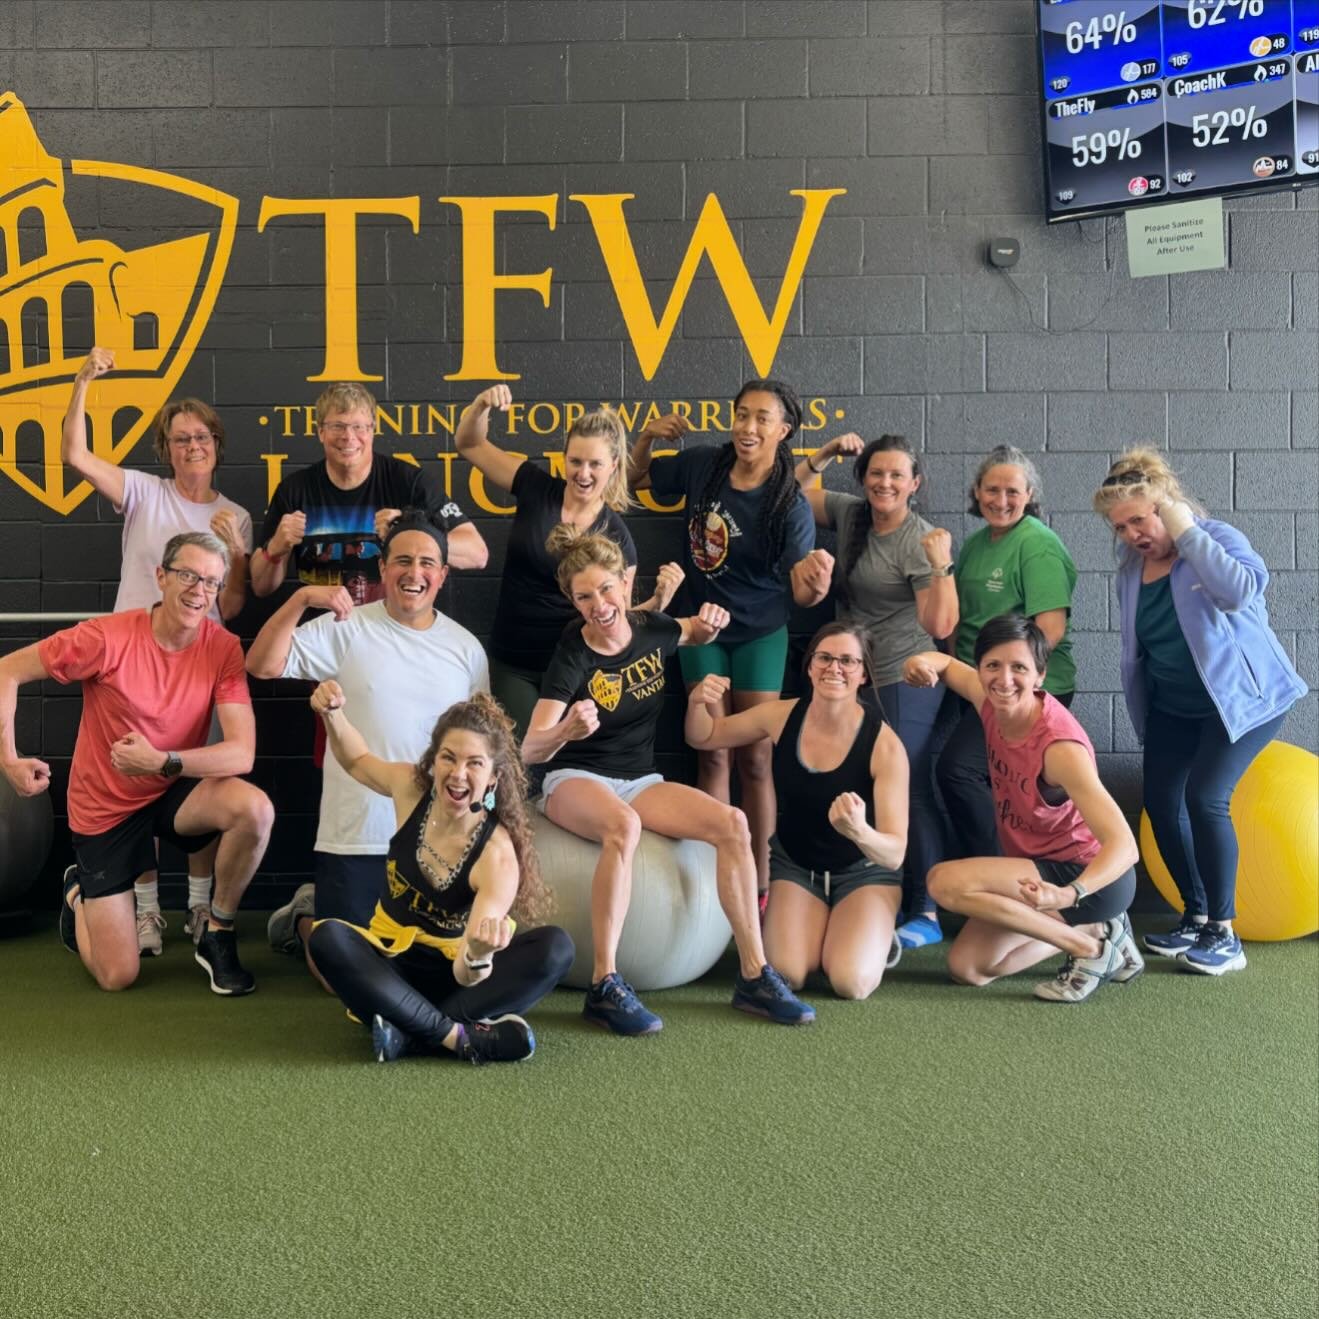 This is how TFW does it! 🙌🏼

We cheer each other on, we work hard and we celebrate our wins! 🎉👊🏽 

Join us Wednesdays to work on Muscular Endurance. 💪🏽 

Or join us any day to Lose Fat, Build Muscle and Feel Good! 

M : Strength Training
T : C